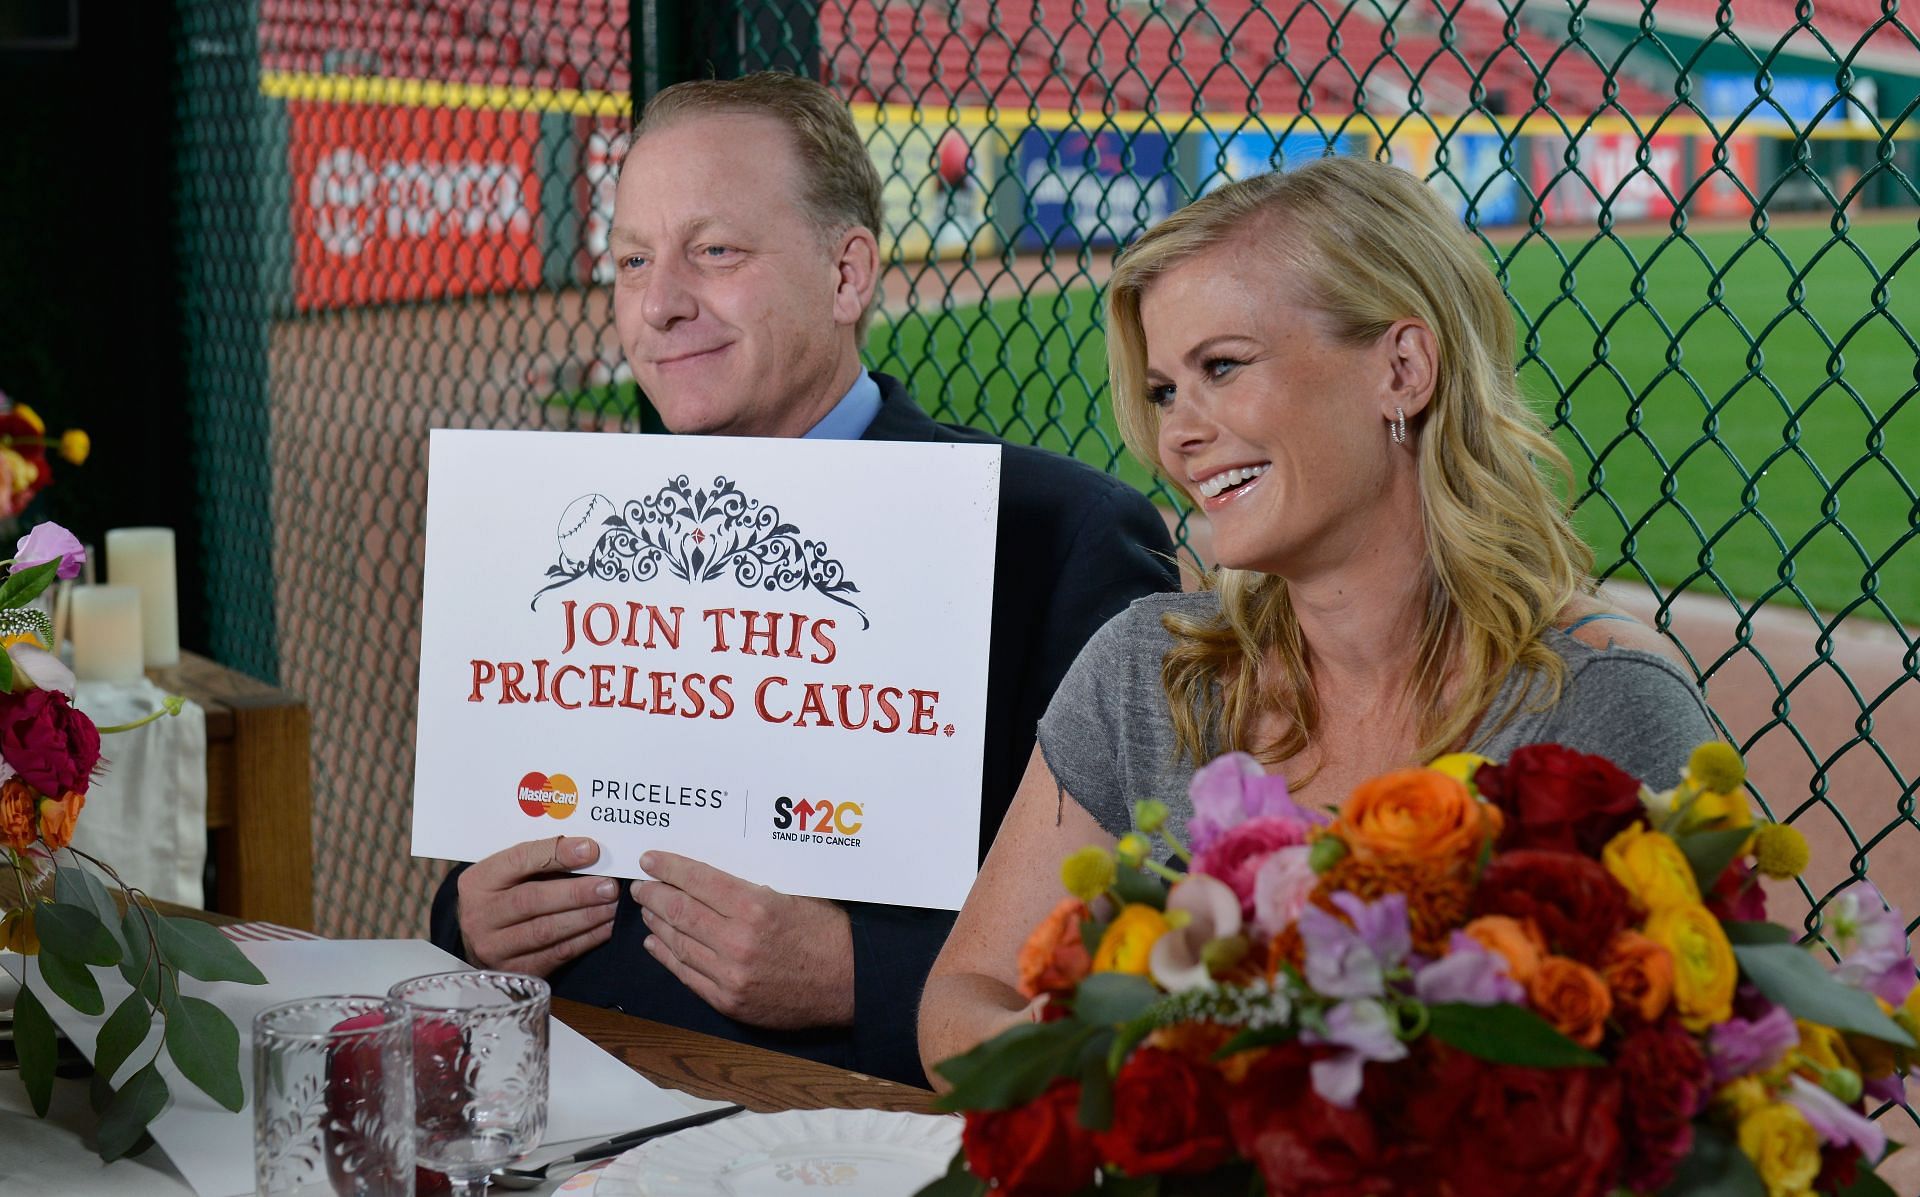 Curt Schilling in 2015 at an event